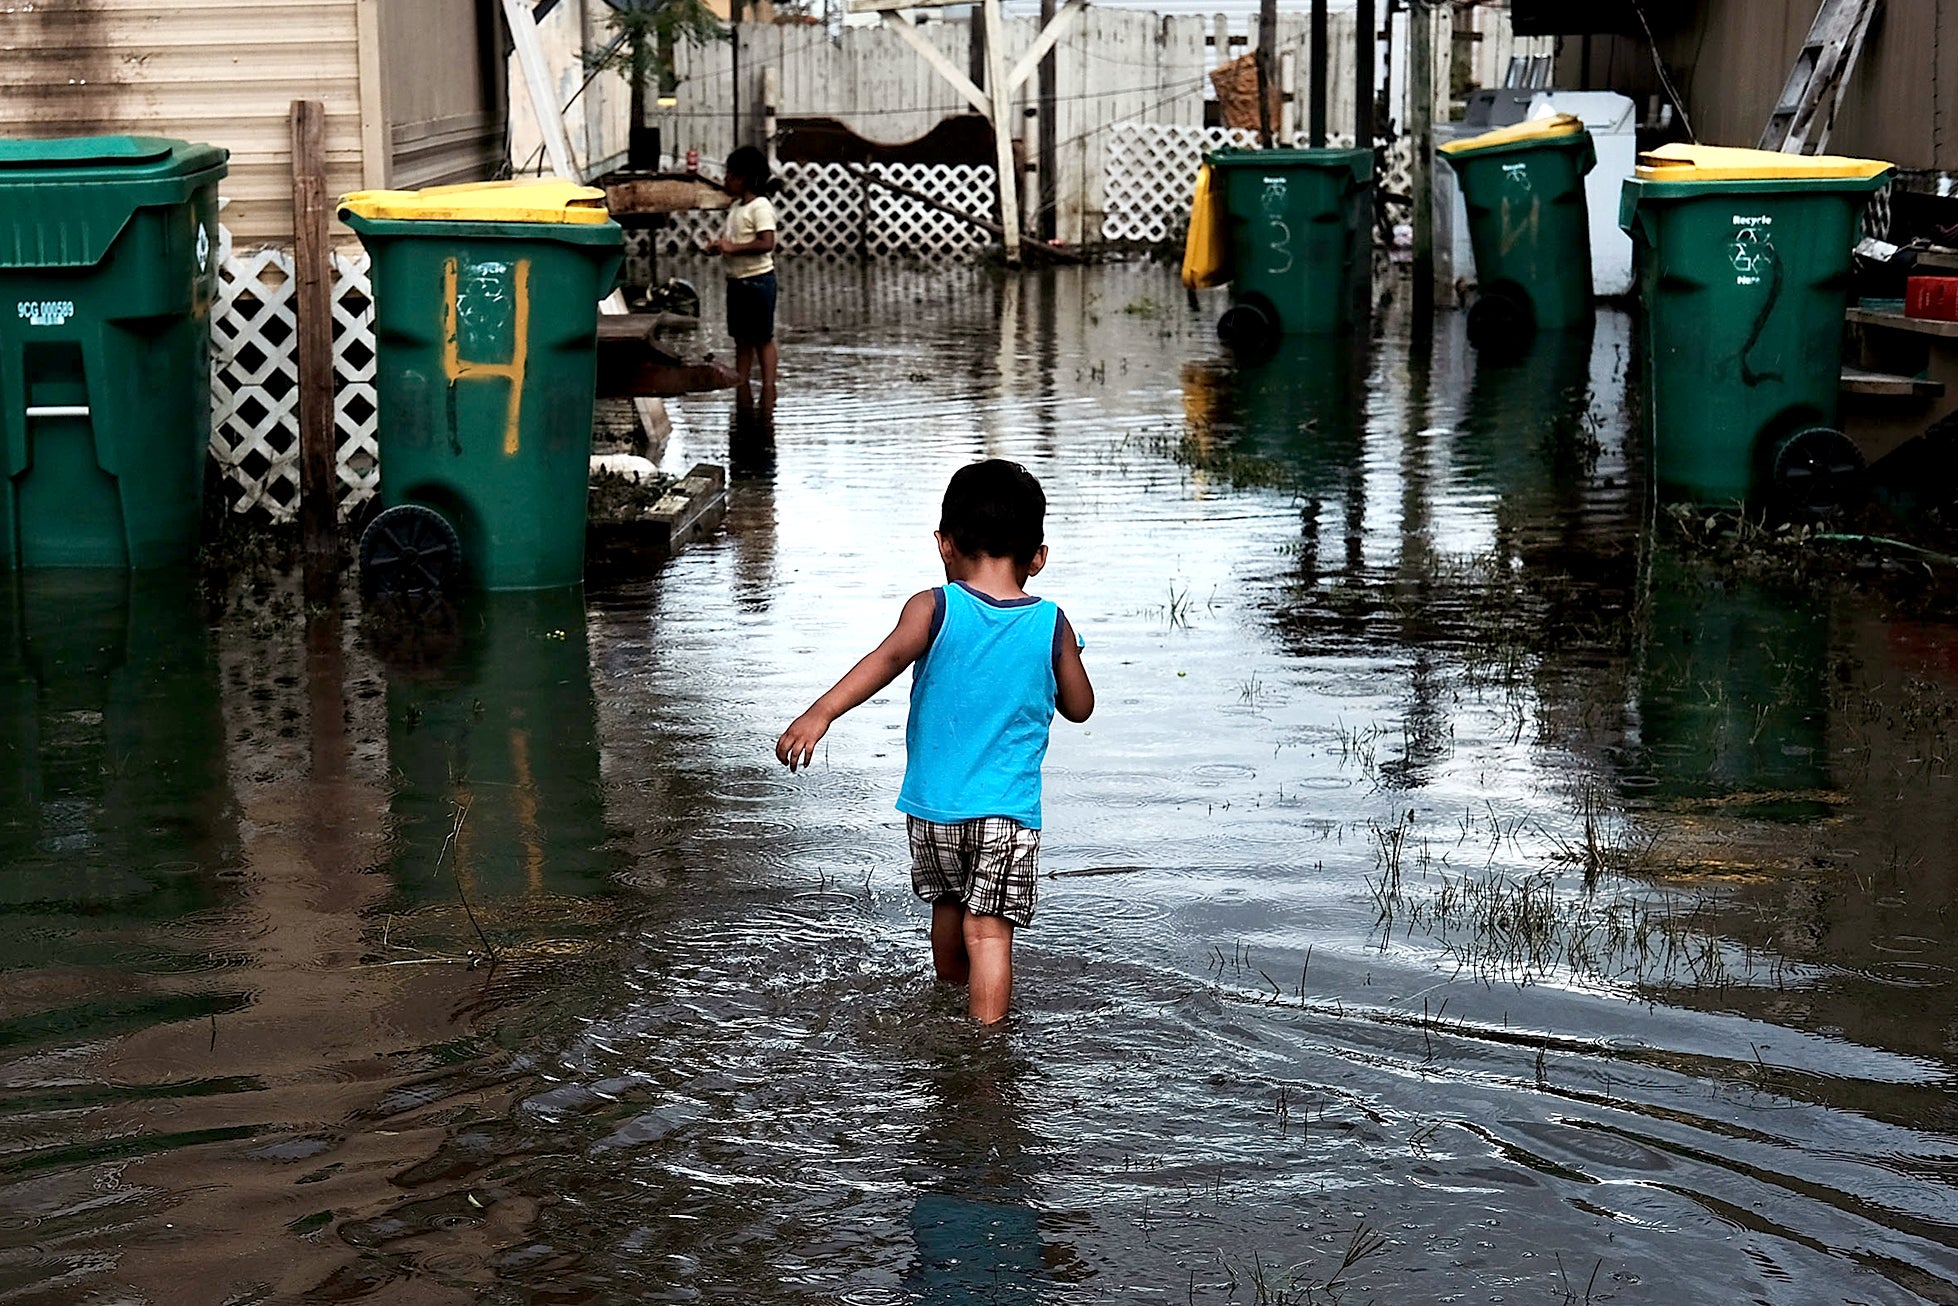 A child walking away from camera in flooded streets.